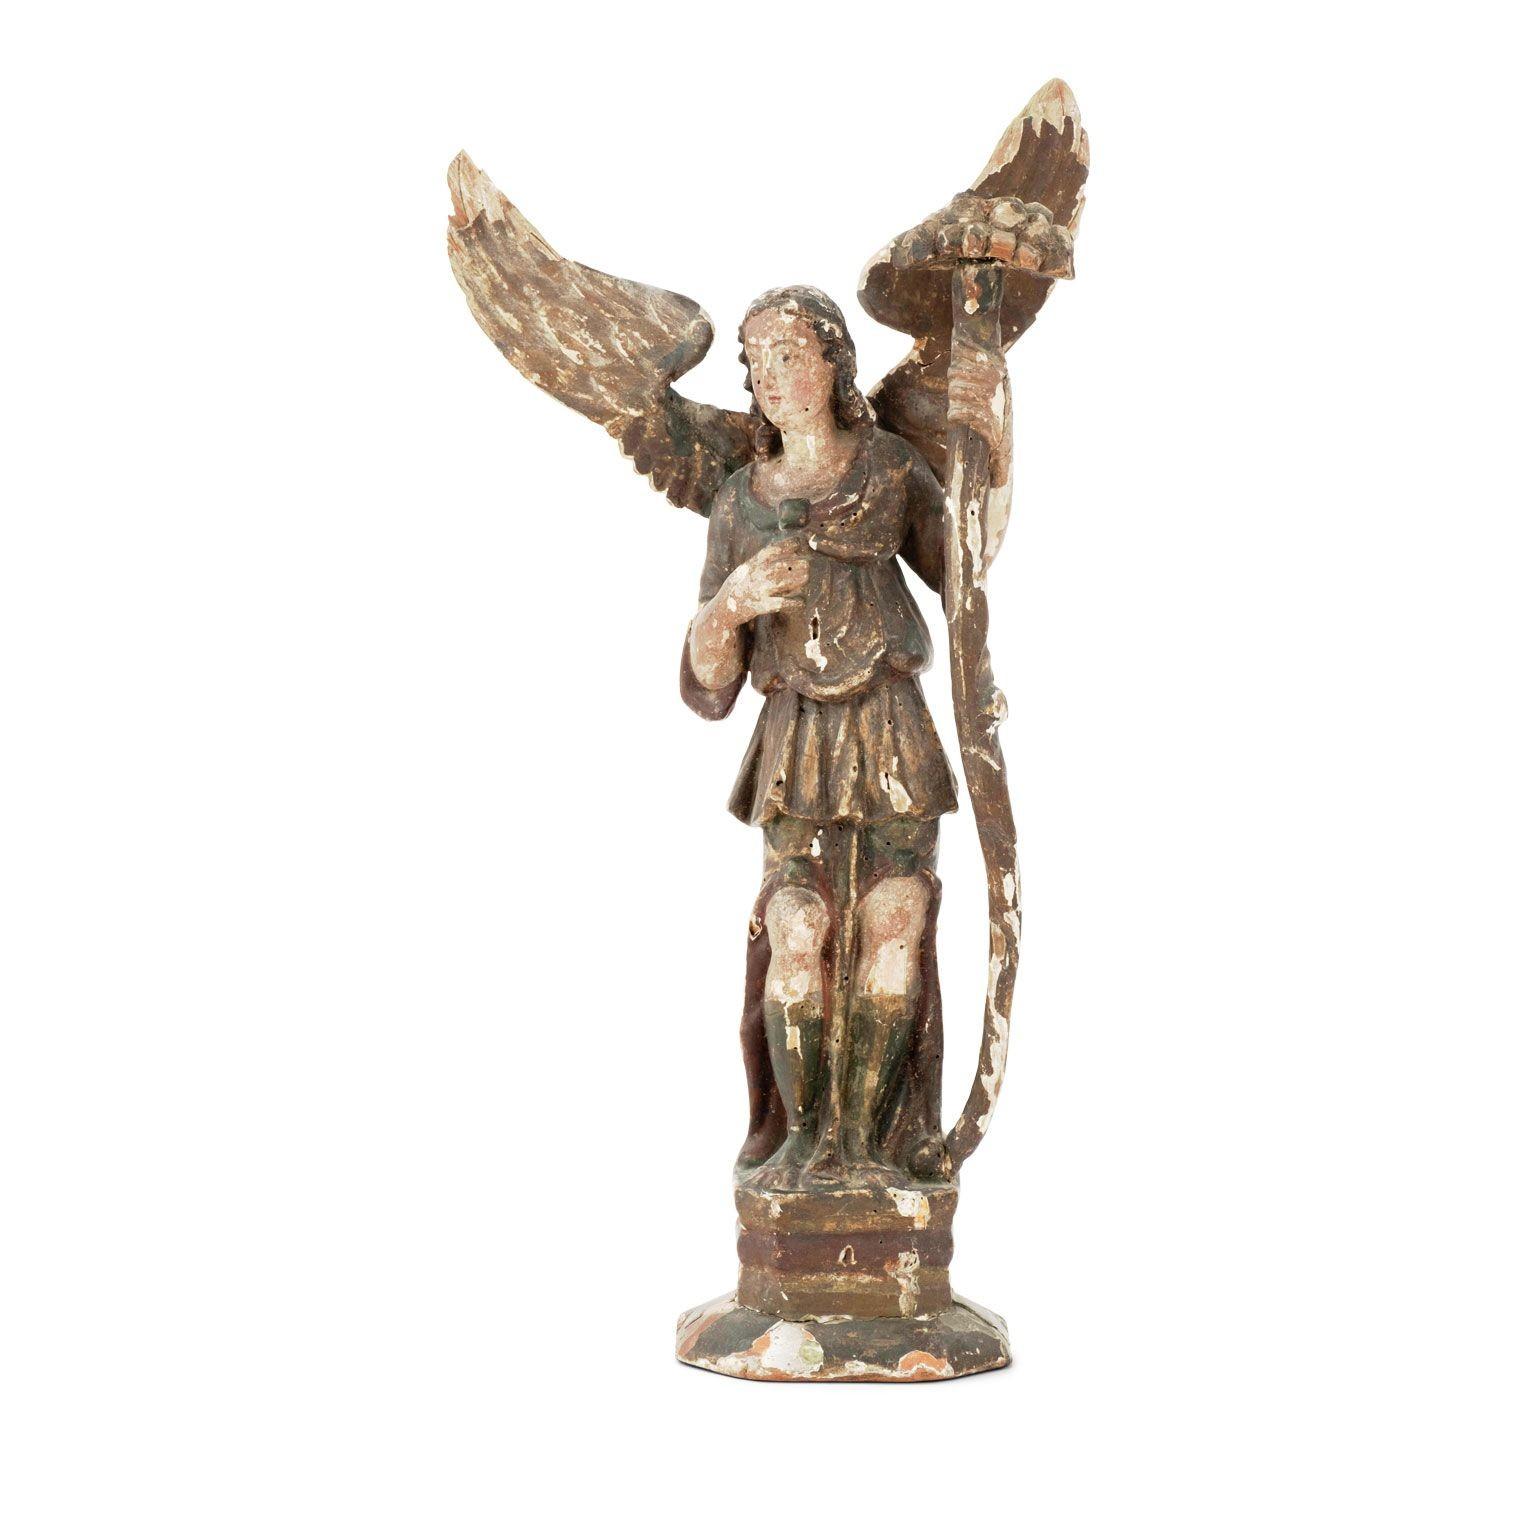 17th century Italian Archangel Michael santo statue, hand-carved circa 1650-1680. Retains much of its original paint and color. Gorgeous patina and details. Nice substantial proportions.